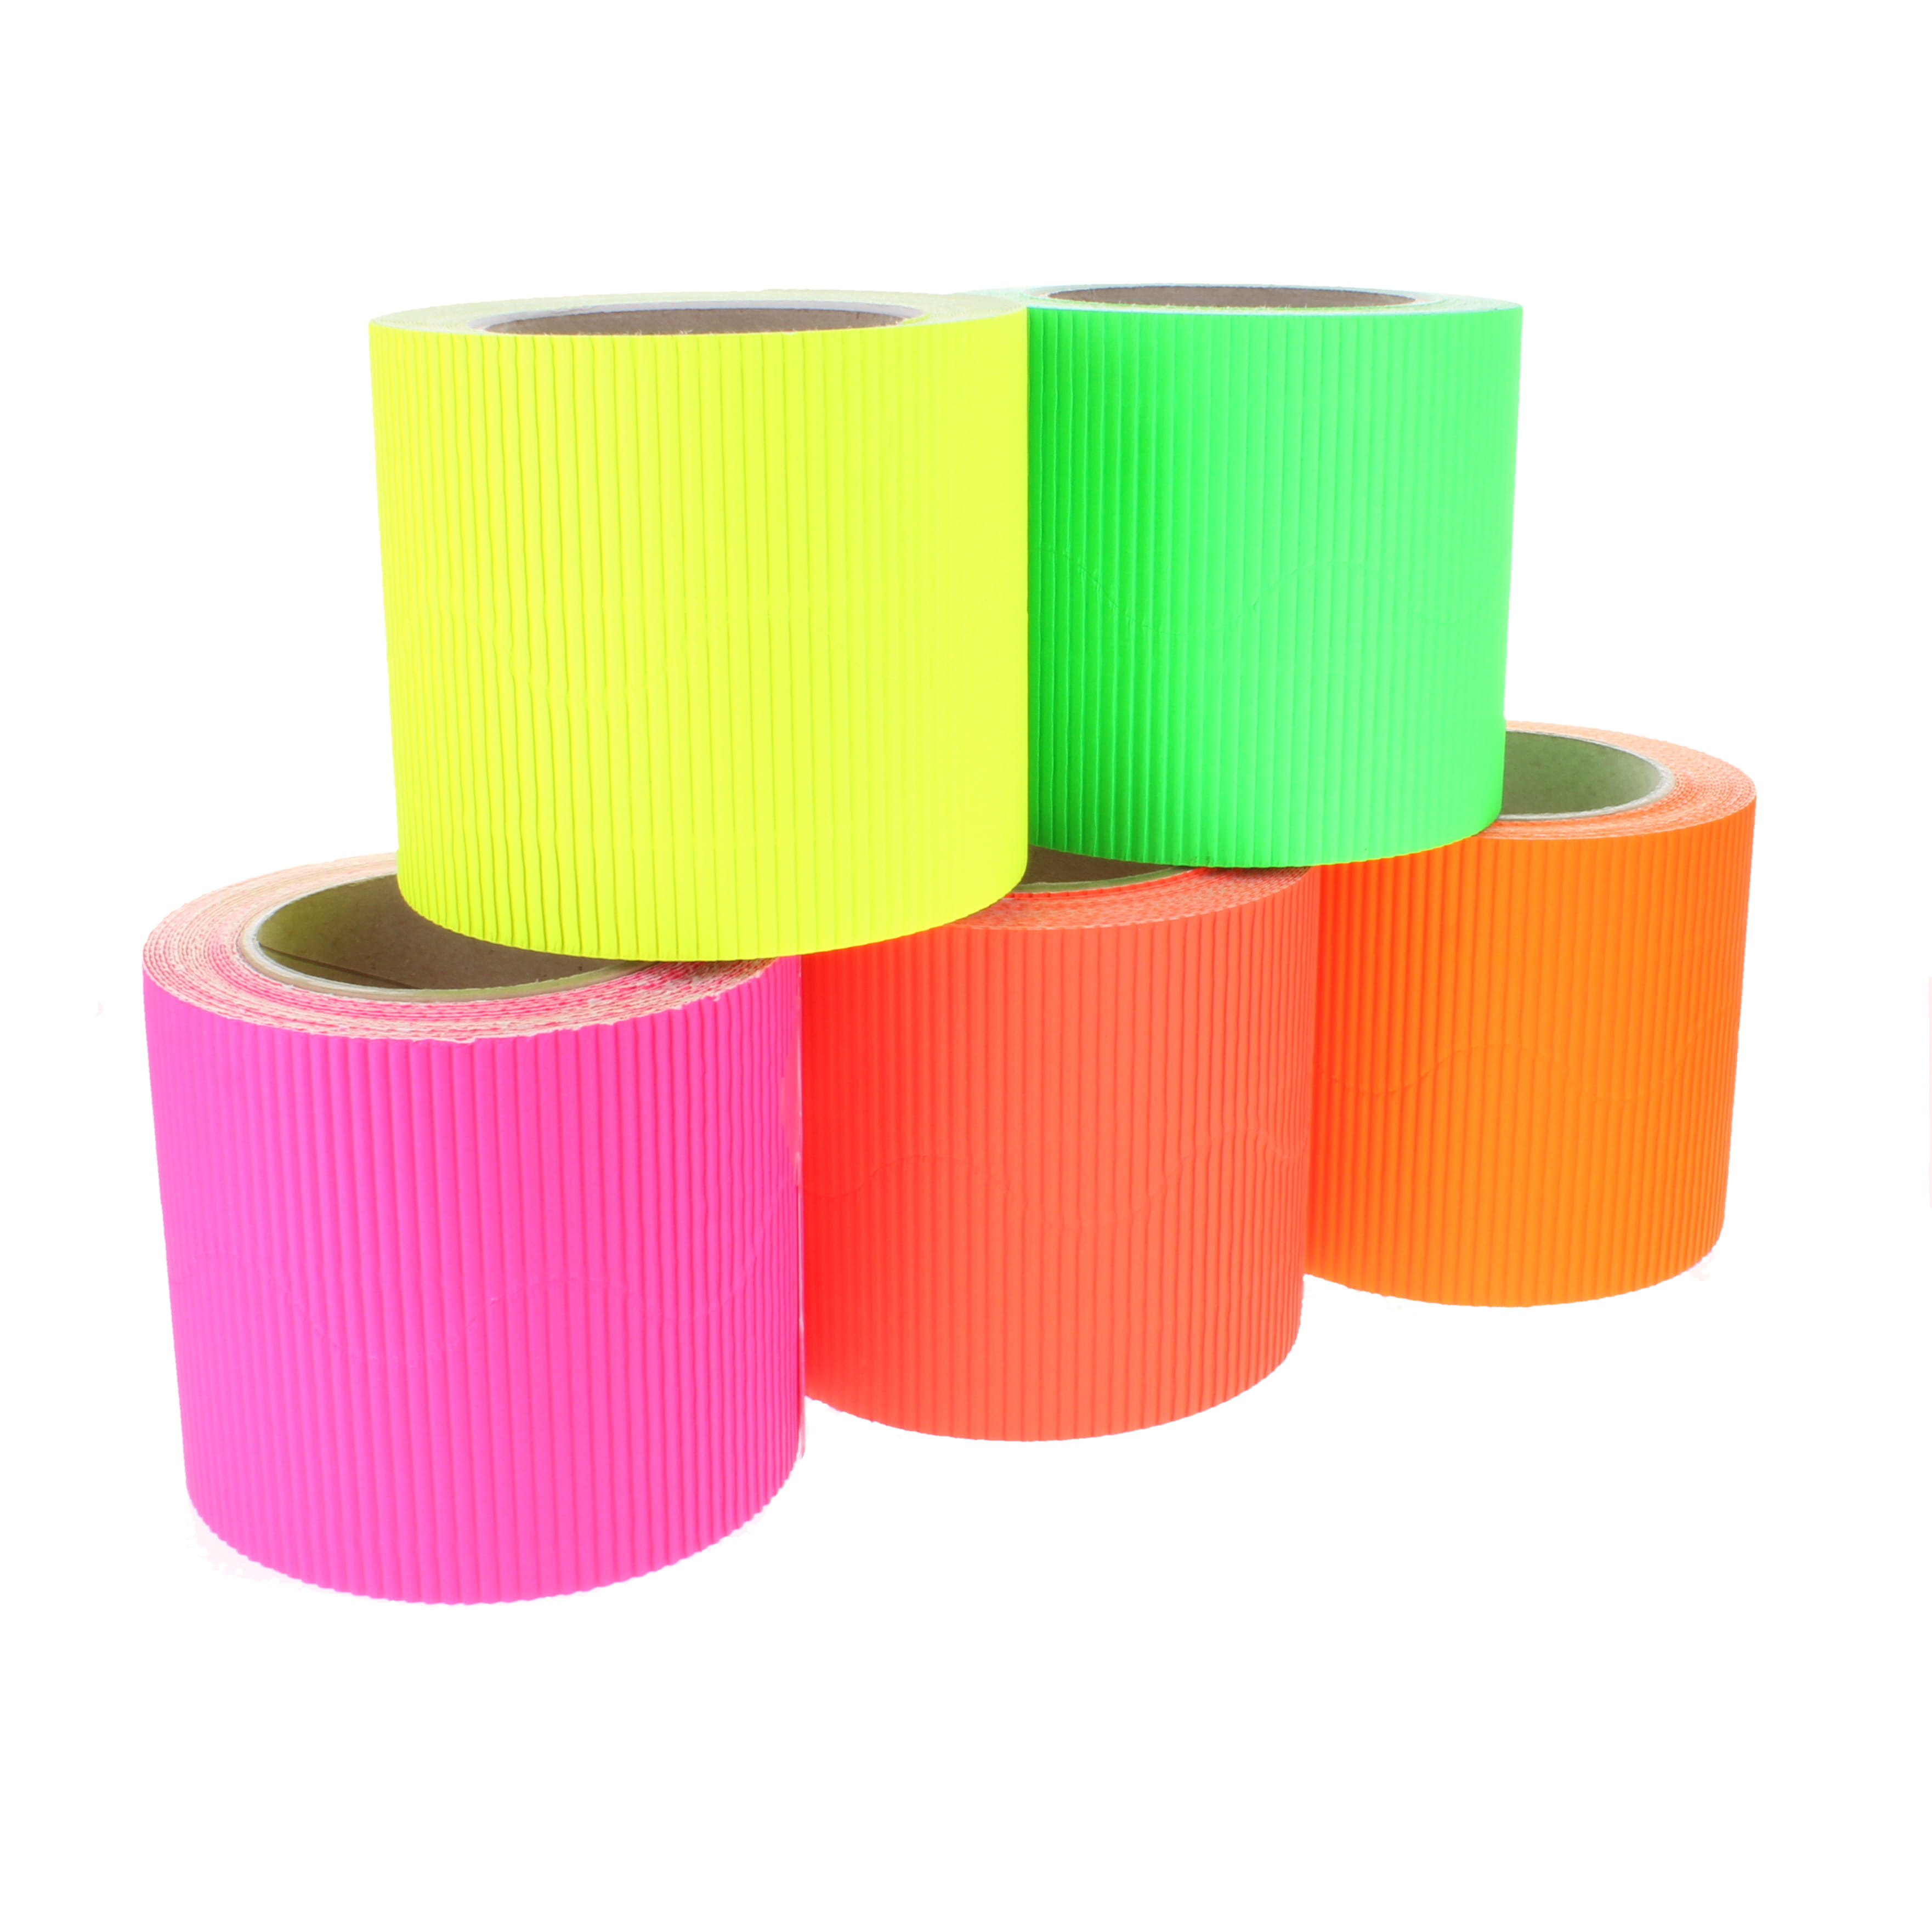 Border Rolls Corrugated Scalloped Assorted Fluorescent 57mm x 7.5m - pack of 10